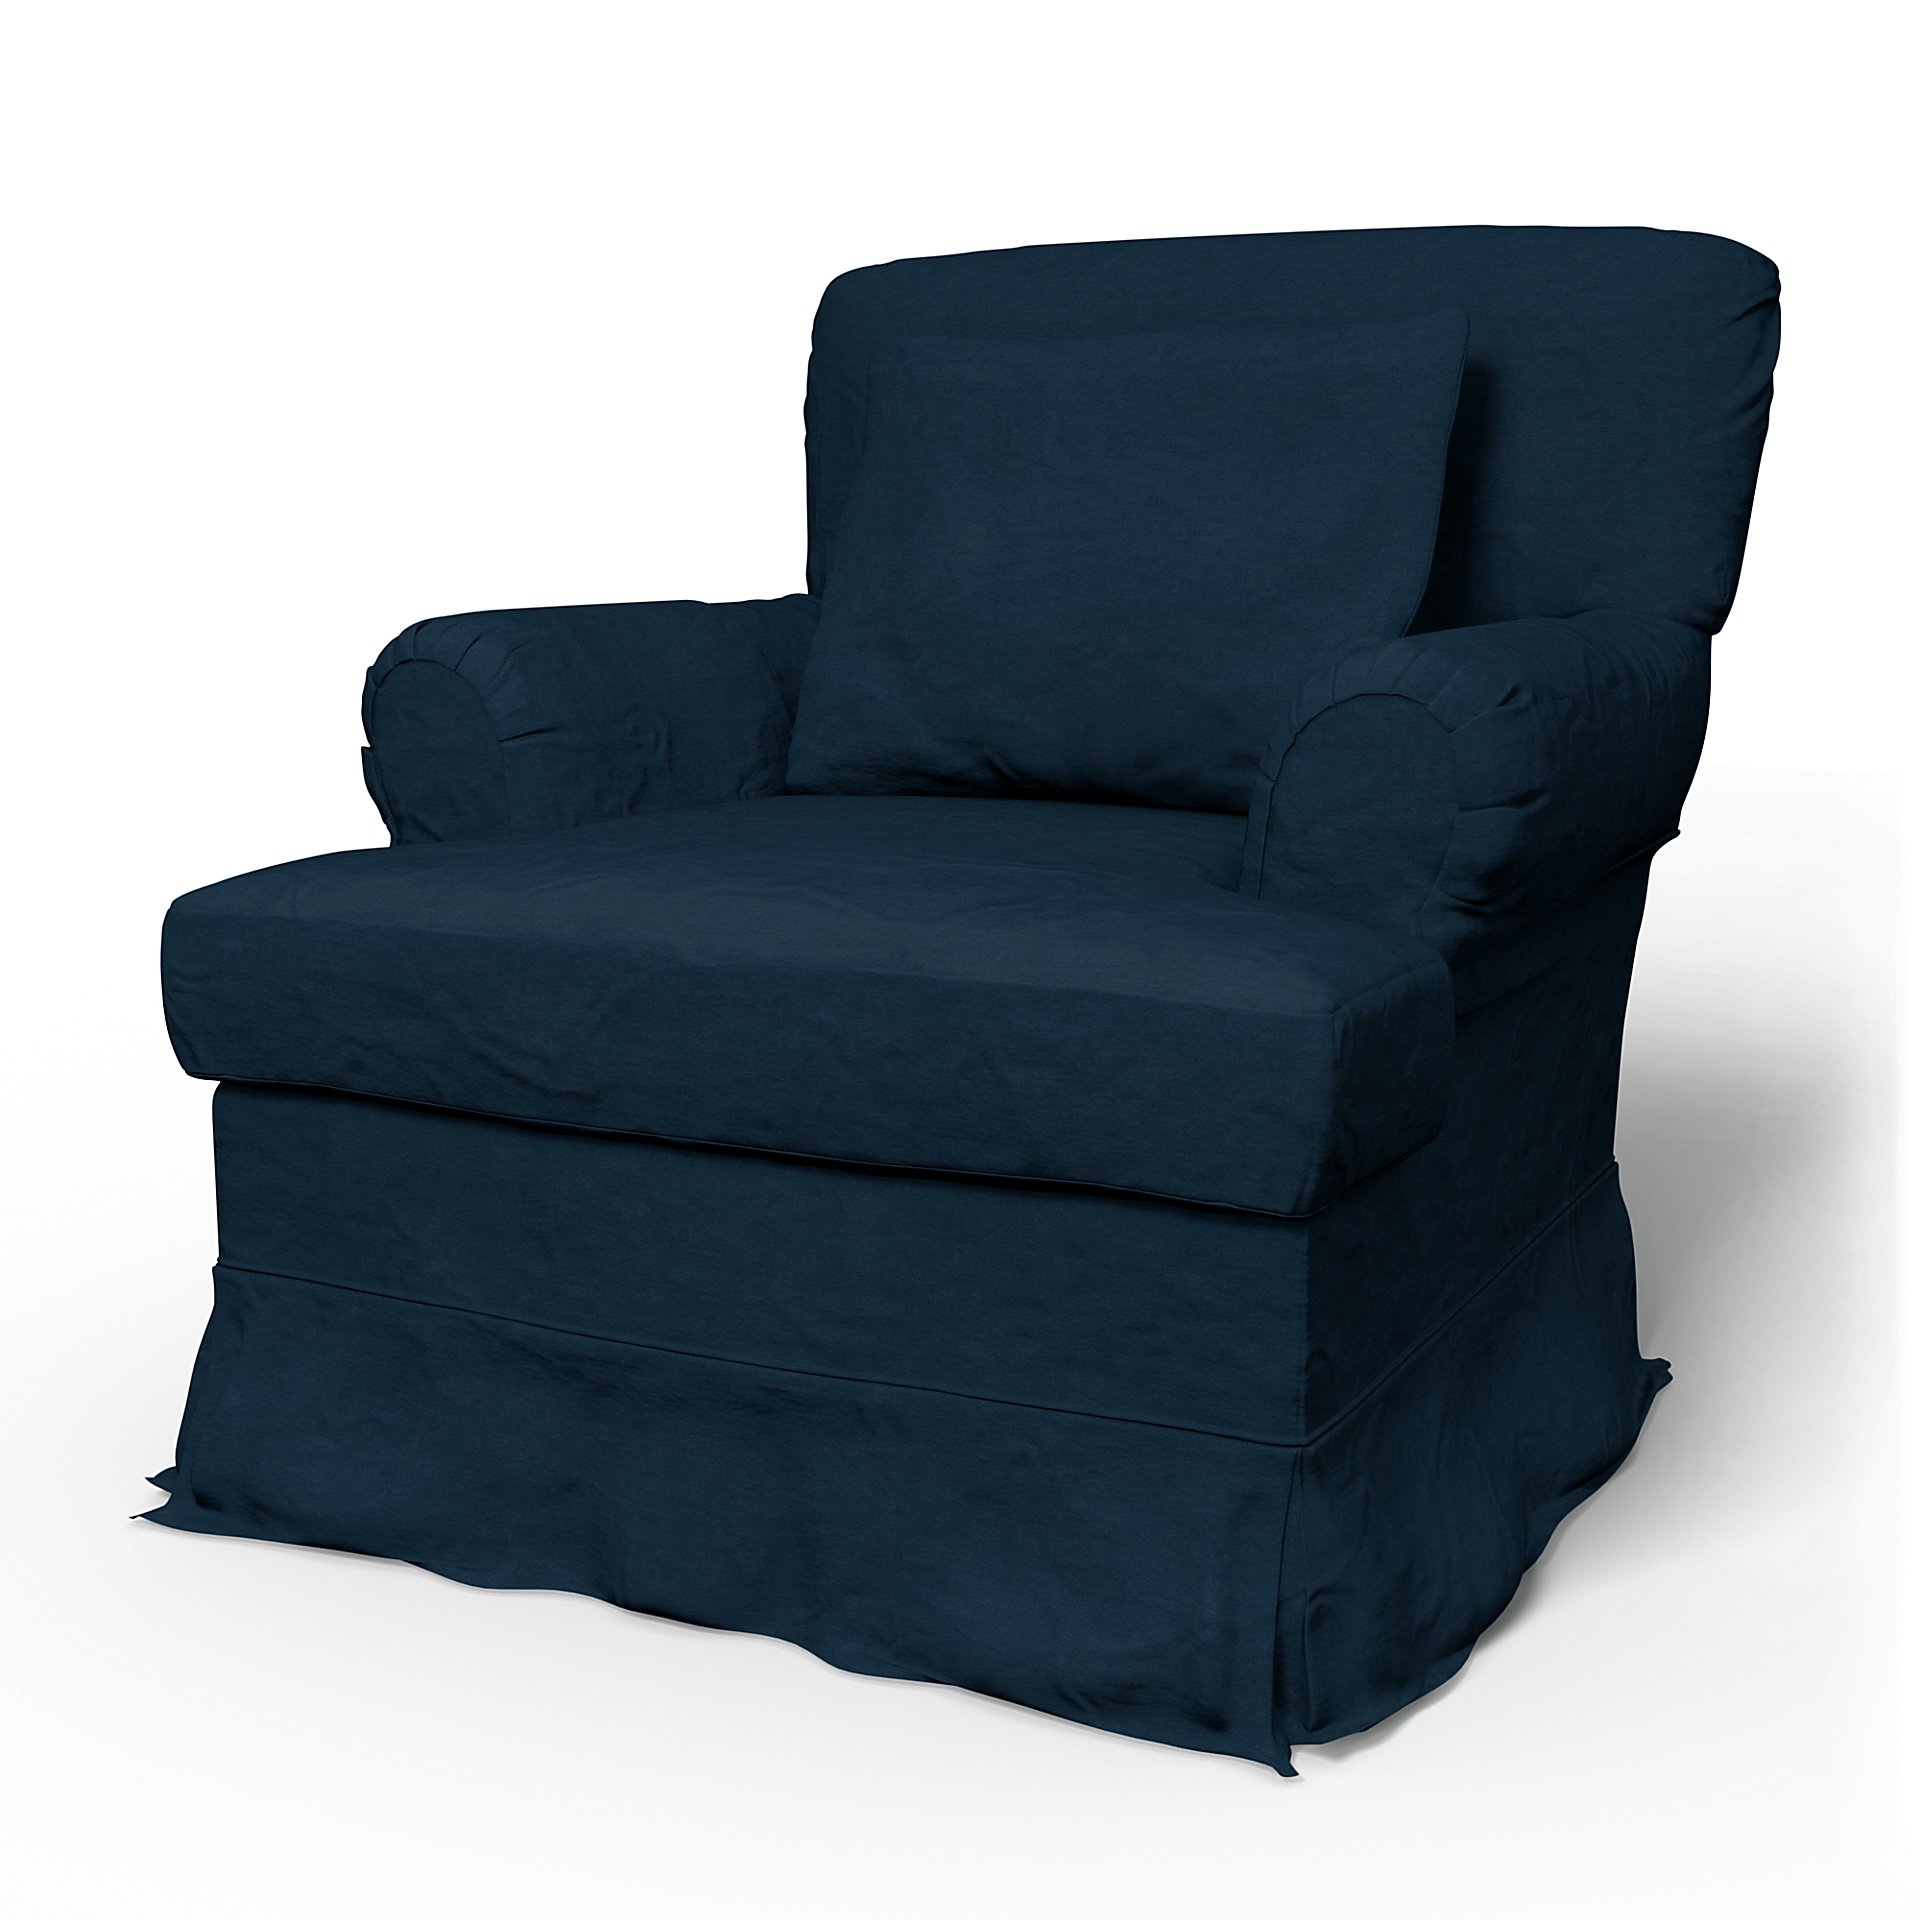 IKEA - Stockholm Armchair Cover (1994-2000) Small Loose Fit, Midnight, Velvet - Bemz